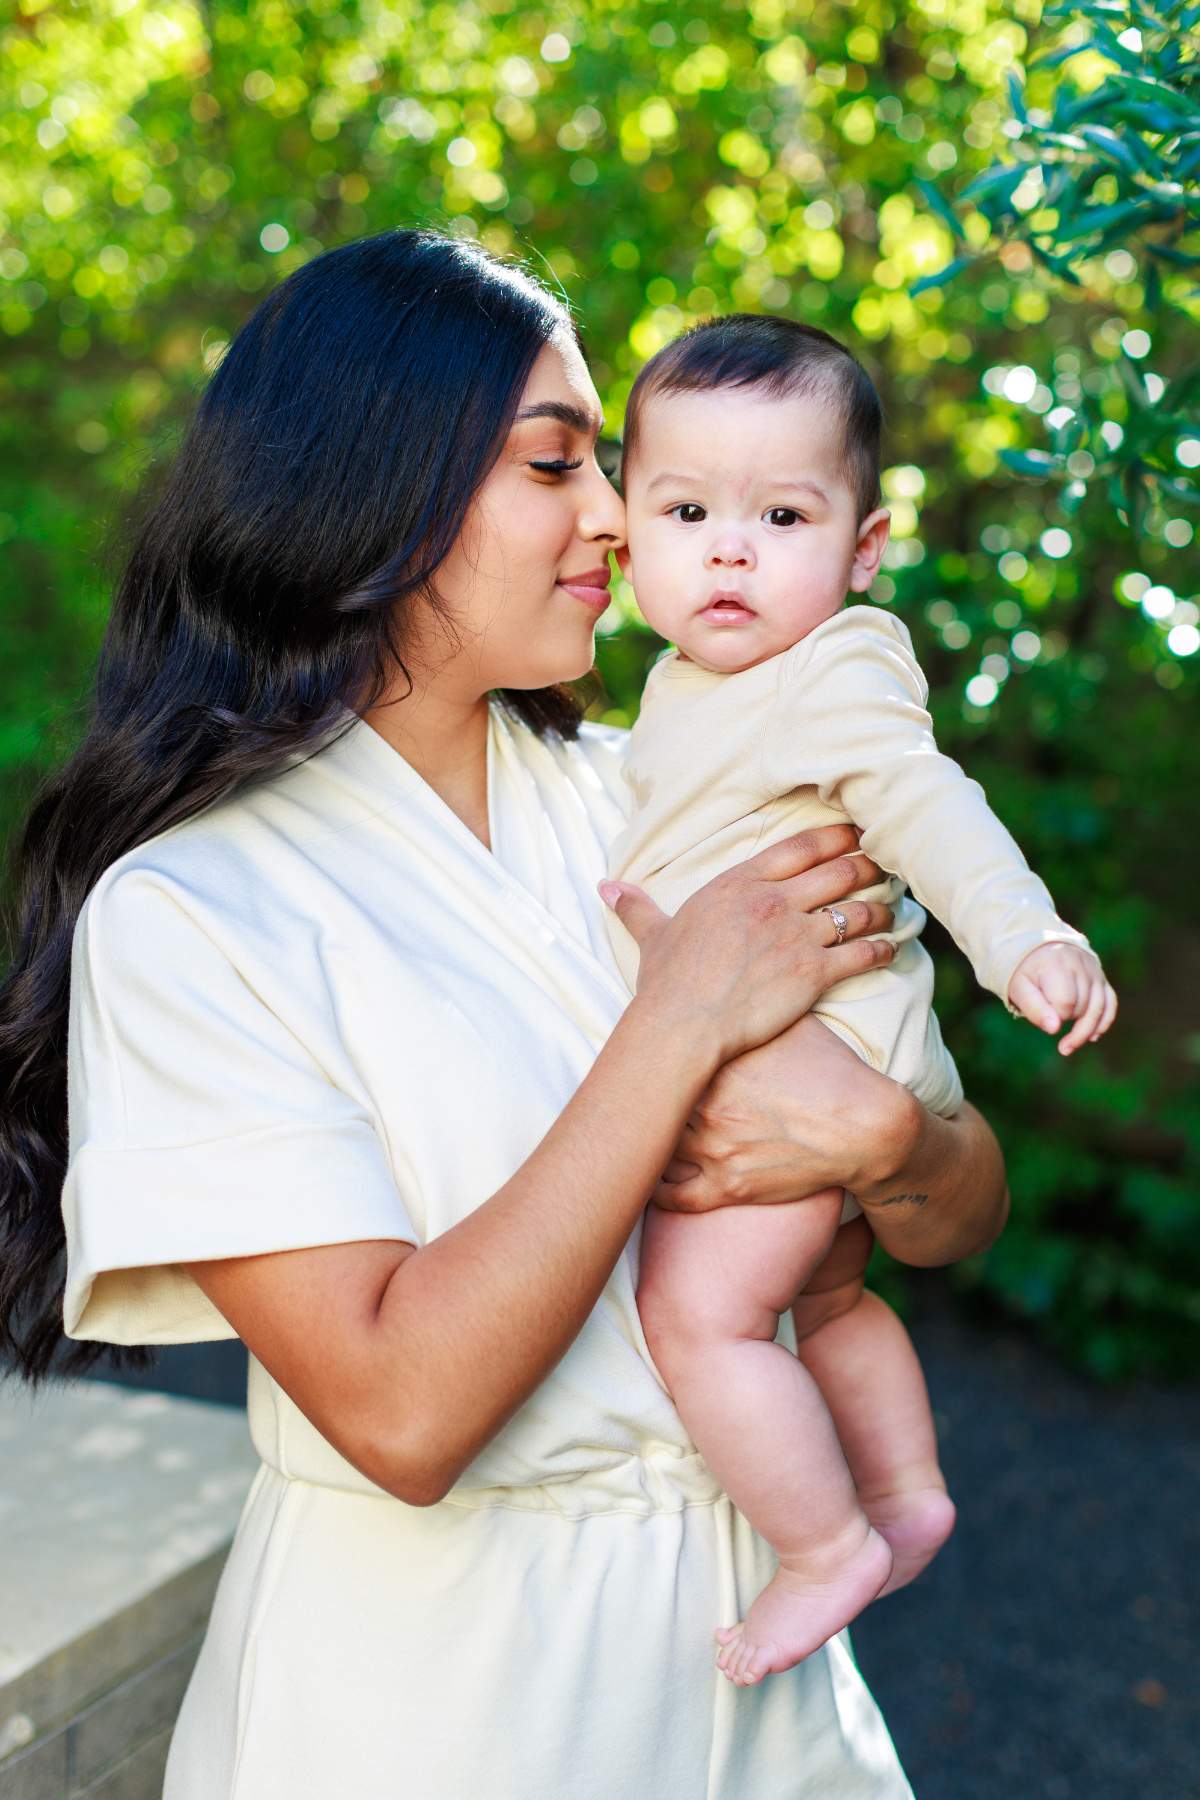 Momma Approved: The Perfect Jumpsuit for New Moms